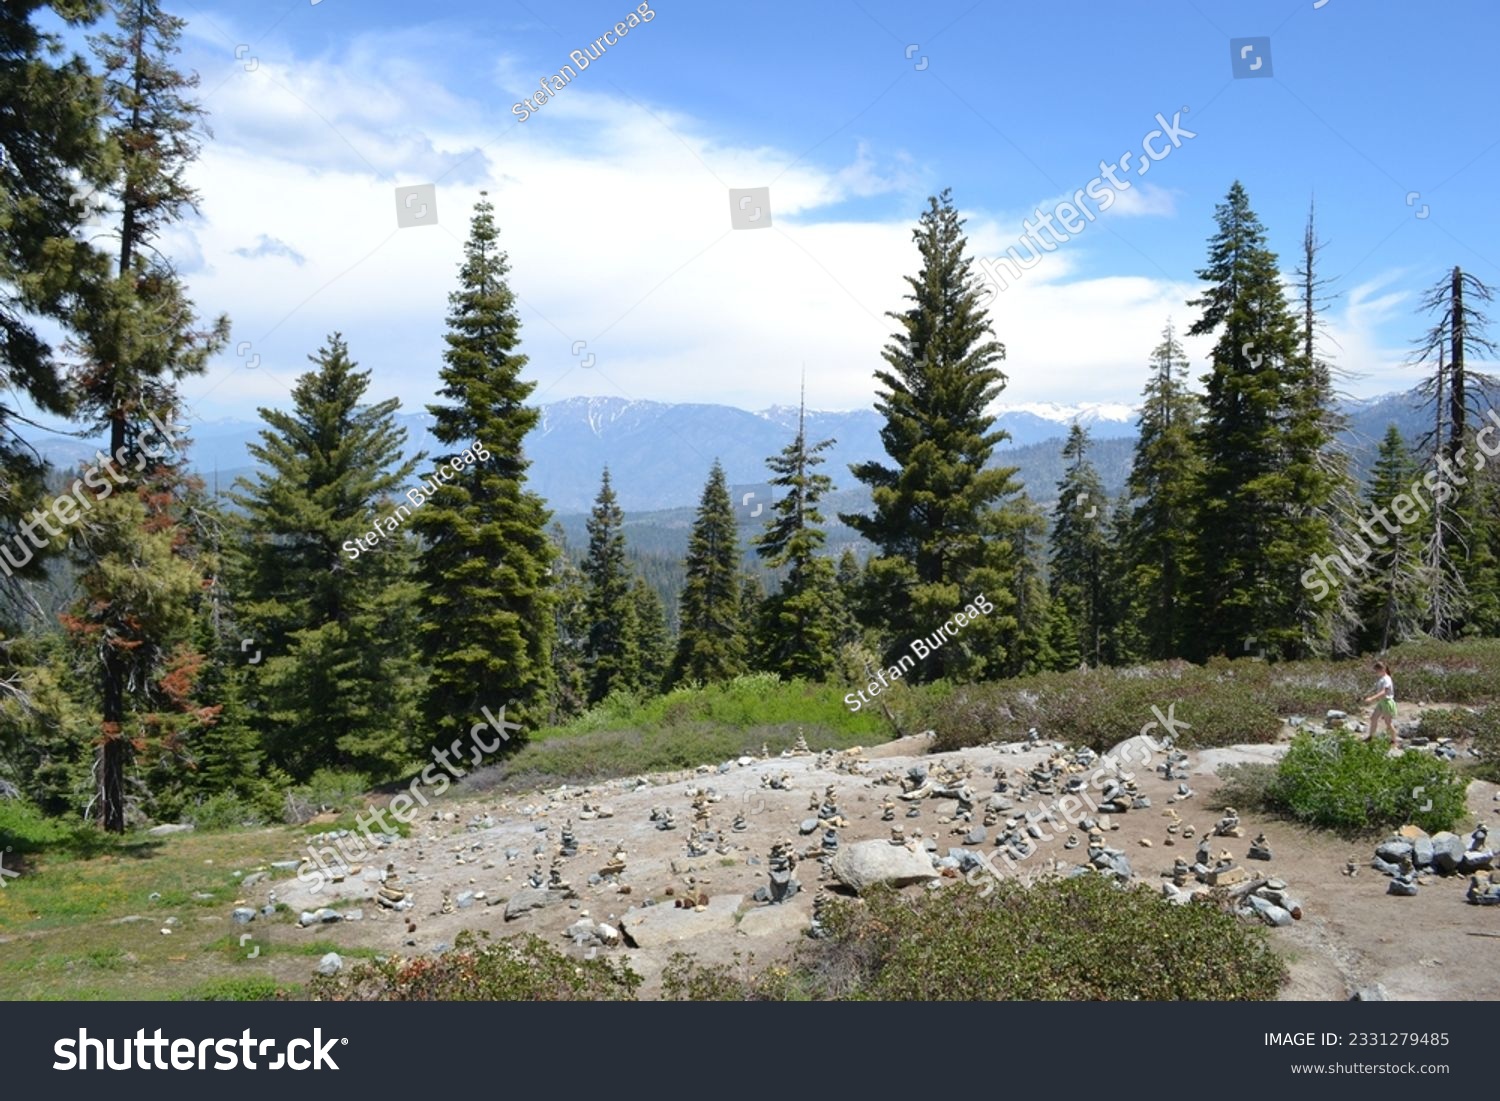 Scenic forested areas in Northern California  #2331279485